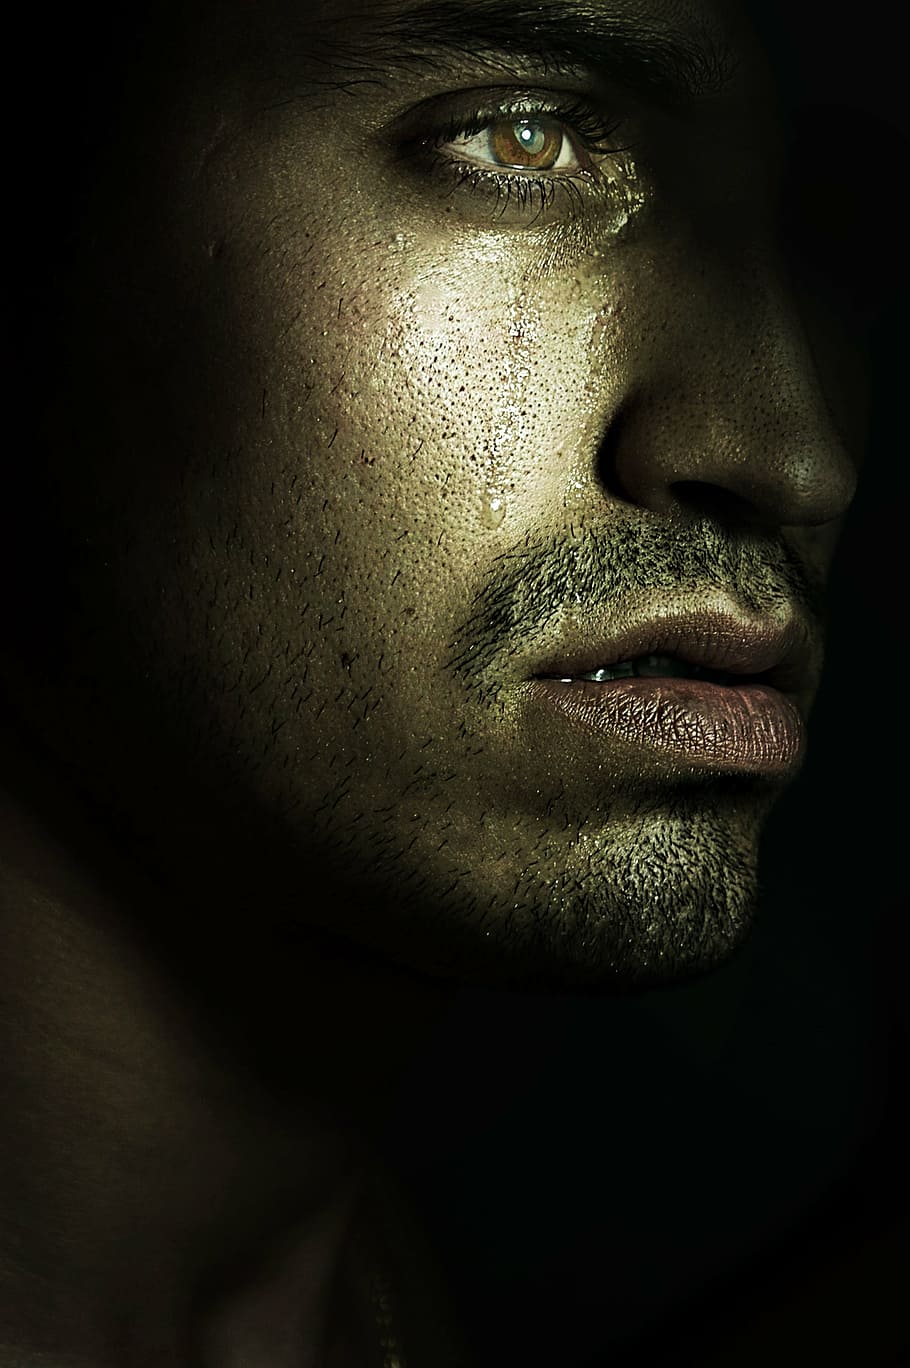 HD wallpaper: man's face crying, tears, look, sad, person, sadness